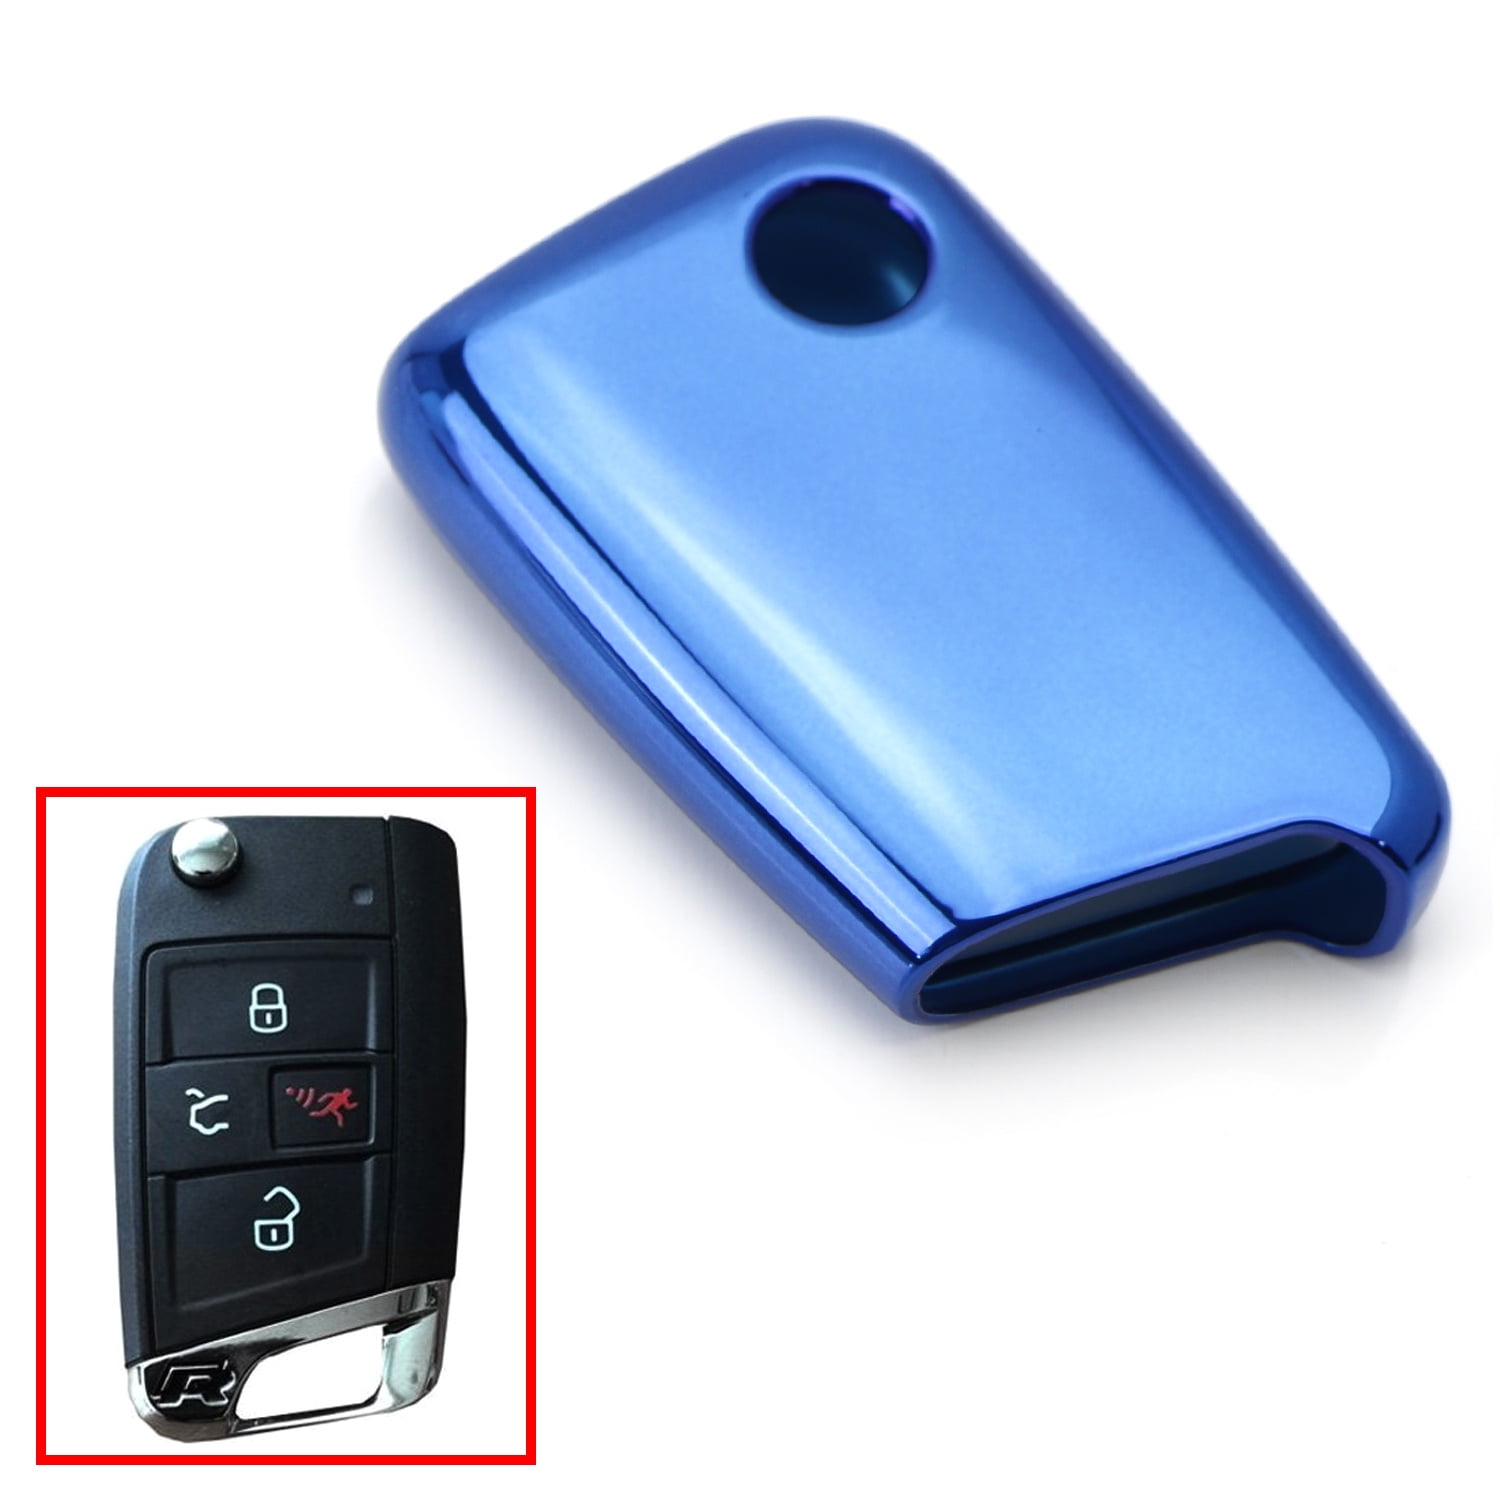 BABY BLUE SILICONE KEY FOB COVER CASE FOR VOLKSWAGEN VW MK7 MKVII BUTTON REMOTE 